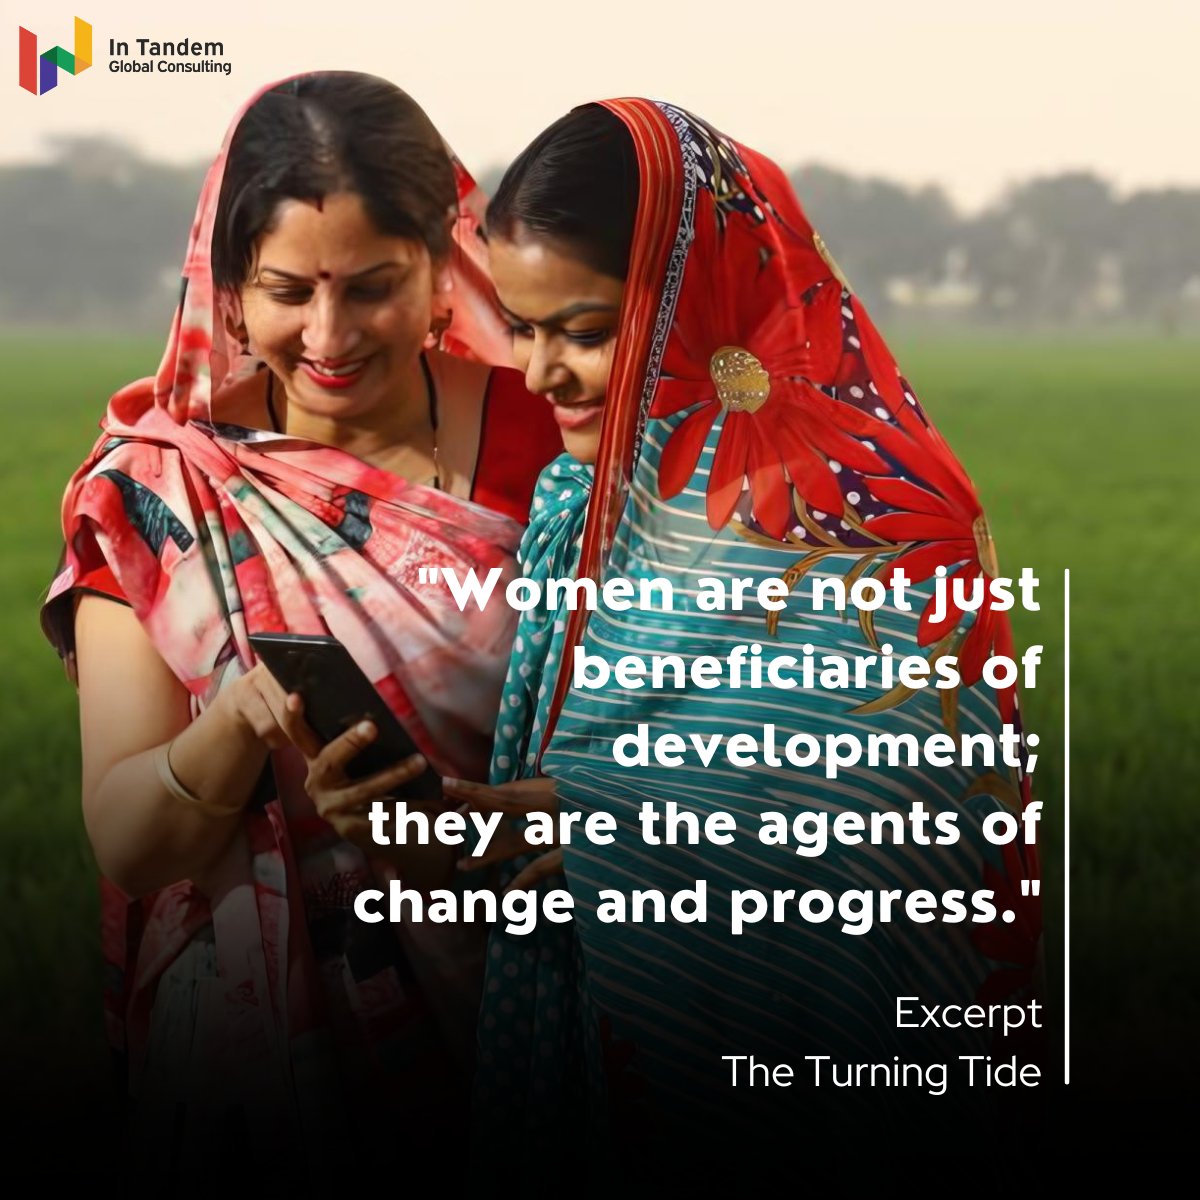 In our research, we found that 65% of respondents plan to reinvest their income to train & uplift other women, creating a ripple effect of empowerment. These remarkable entrepreneurs are not just building businesses; they are creating supportive communities. #TheTurningTide